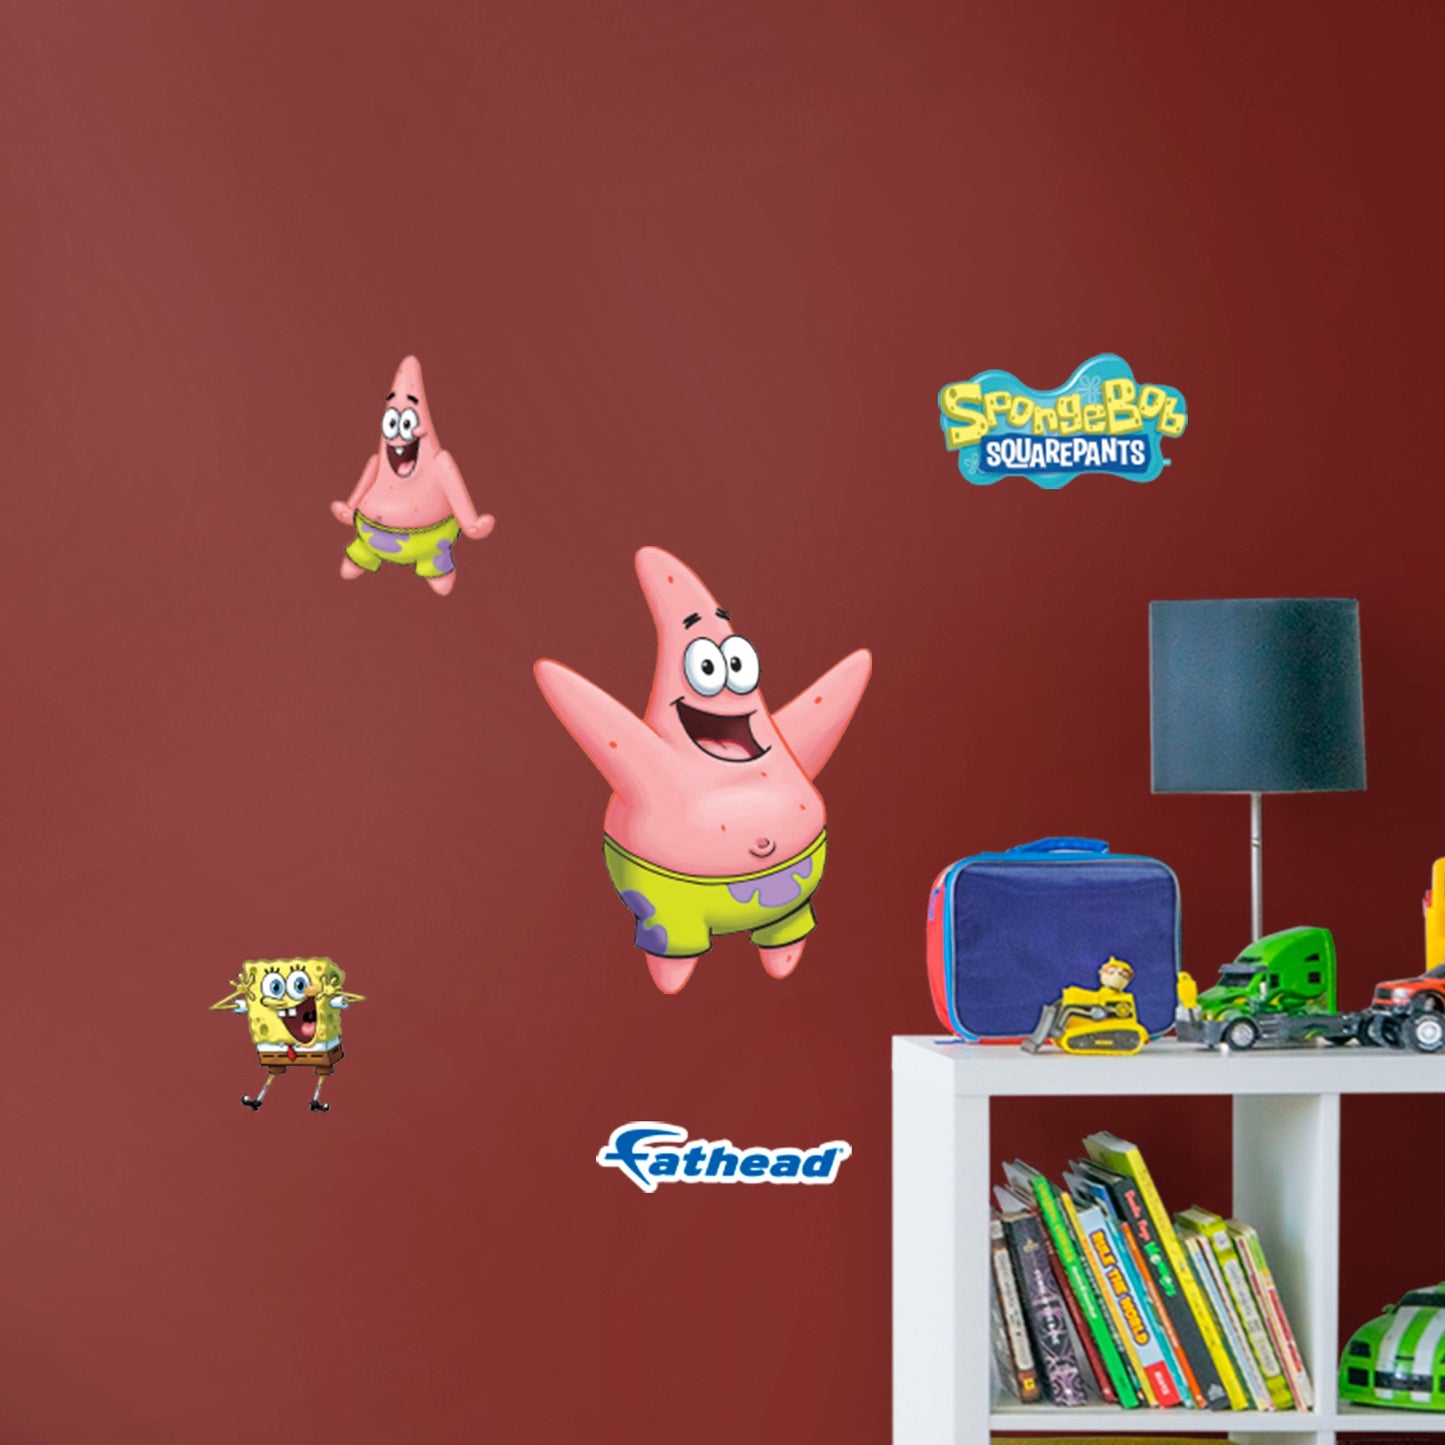 SpongeBob Squarepants: Patrick RealBigs - Officially Licensed Nickelodeon Removable Adhesive Decal